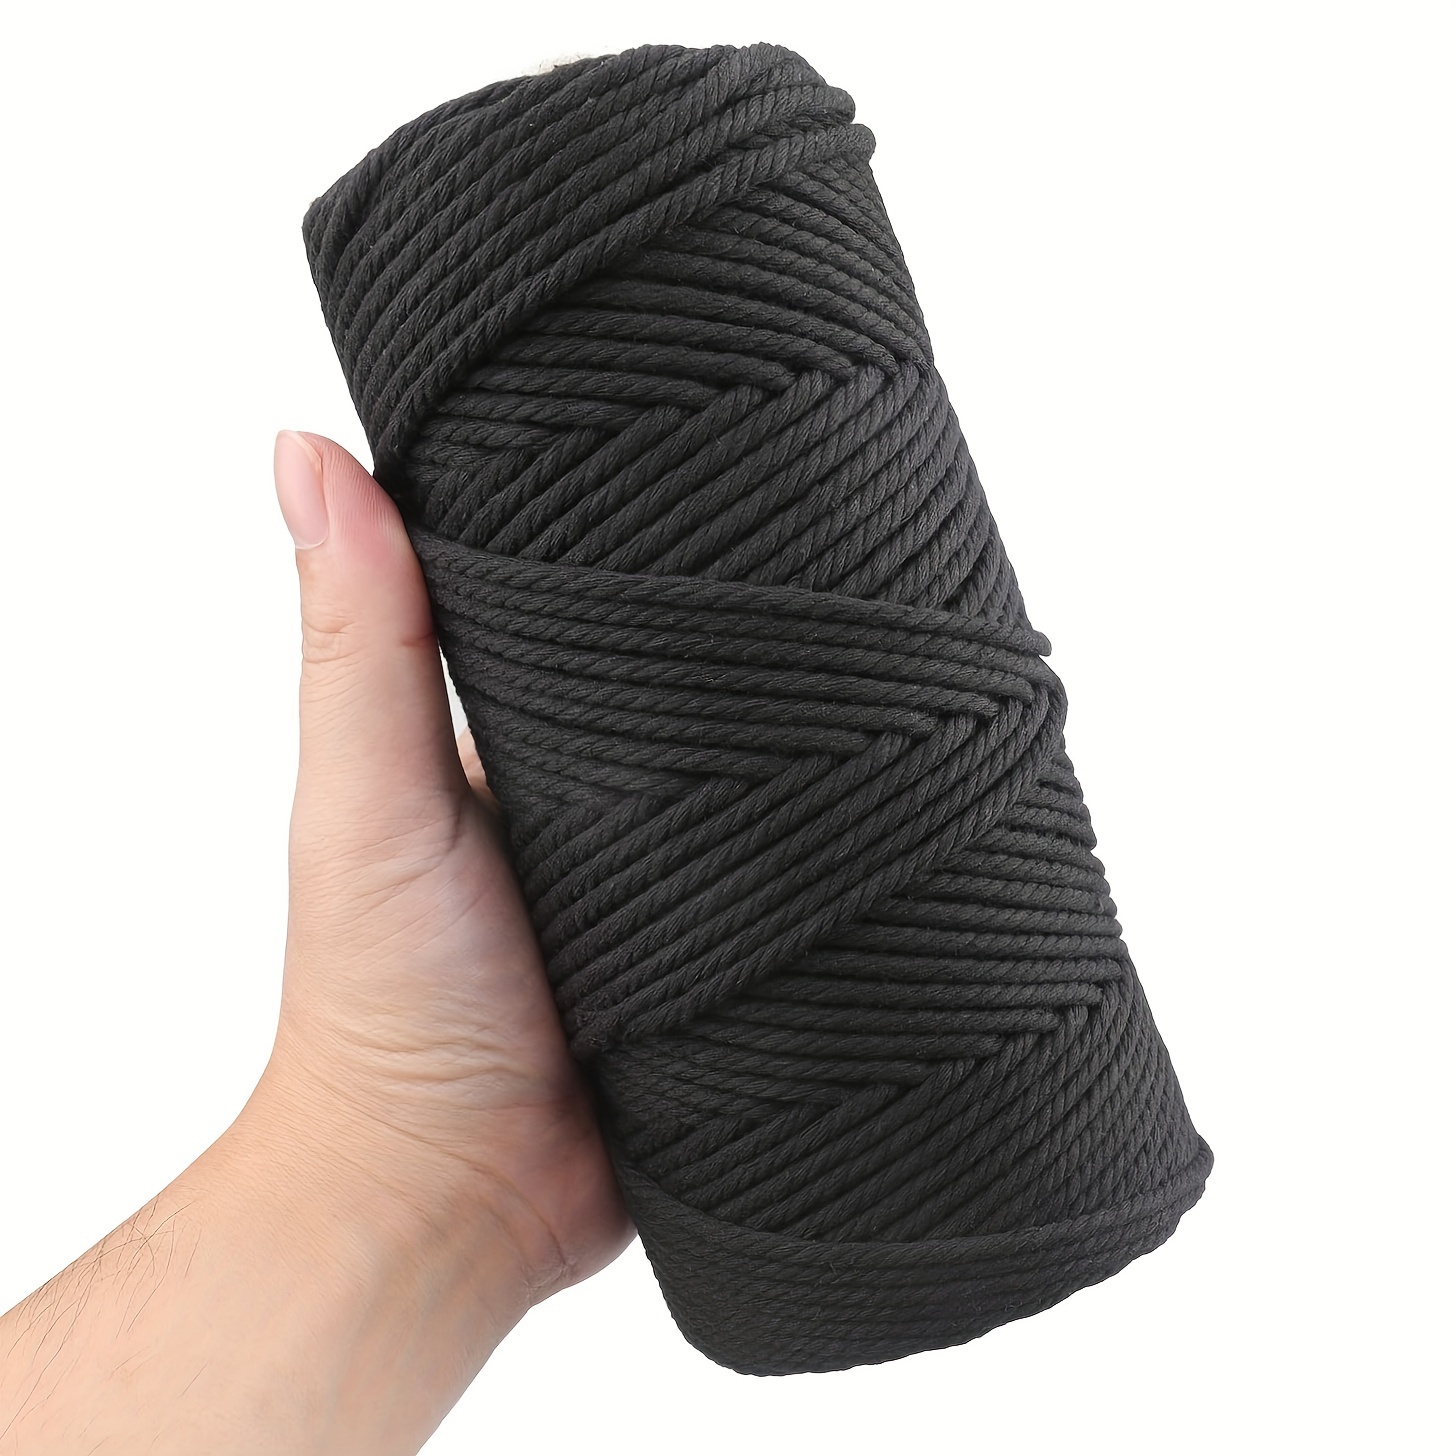 

Premium Black Macrame Cord 3mm X 50m/100m - Cotton String Twine Rope For Decoration, Plant Hangers, Knitting, Wall Hangings, Gift Wrapping, Baking Supplies